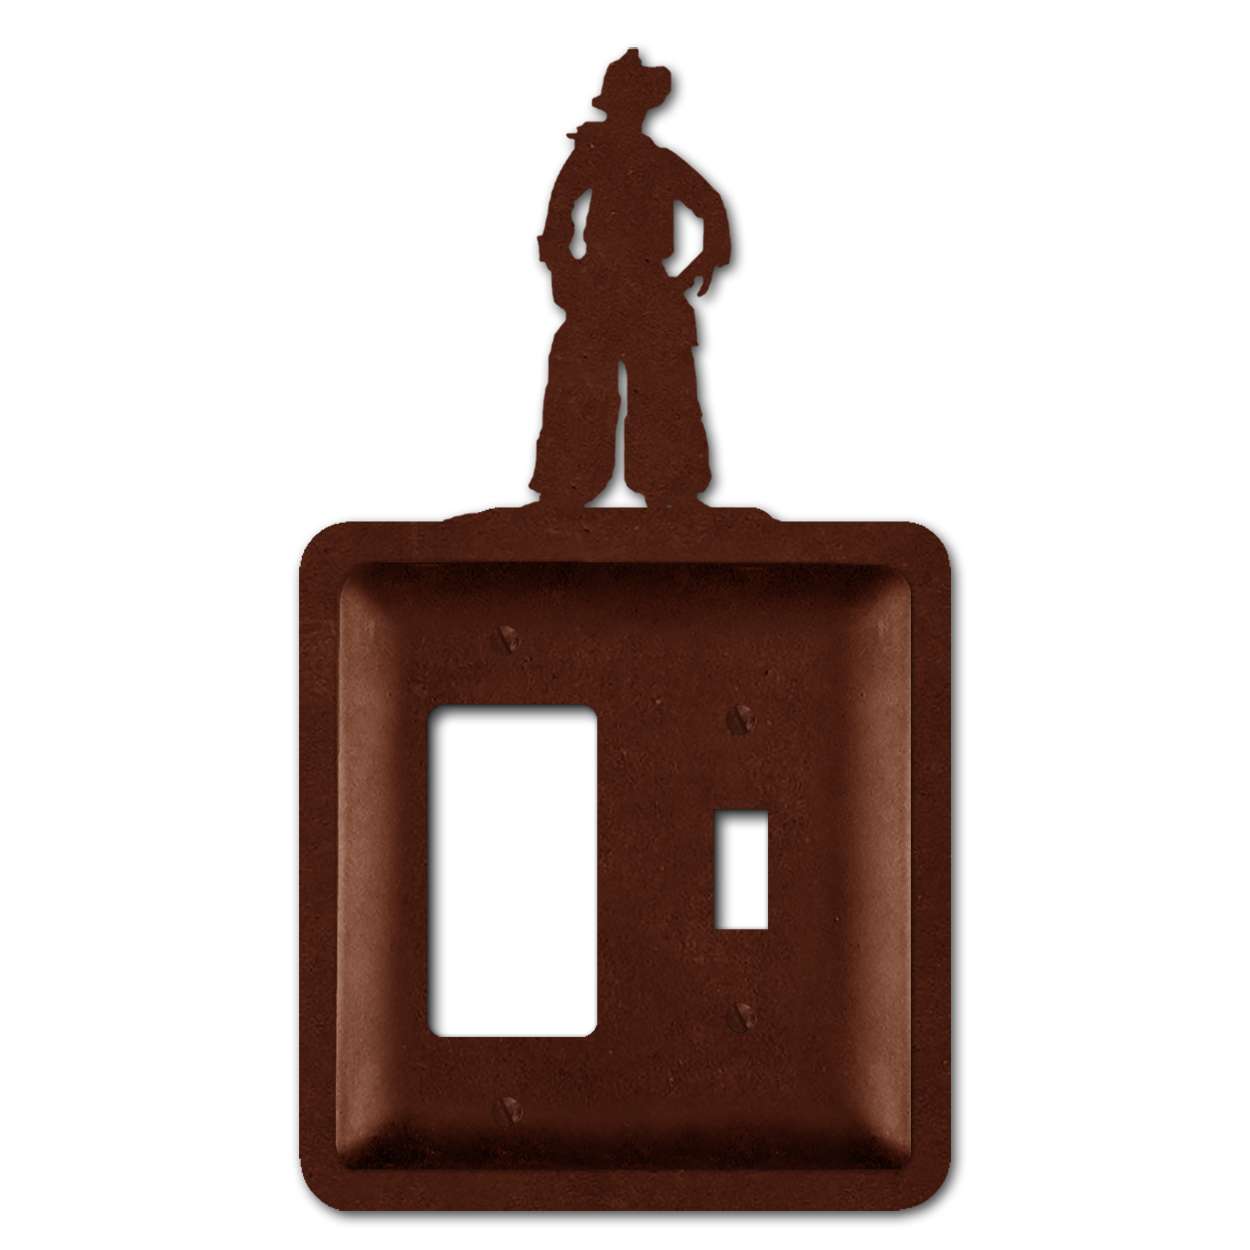 182090RT - Rust Brown 2-Part Metal Wall Plate - Cowboy - GFI with Standard Swtch